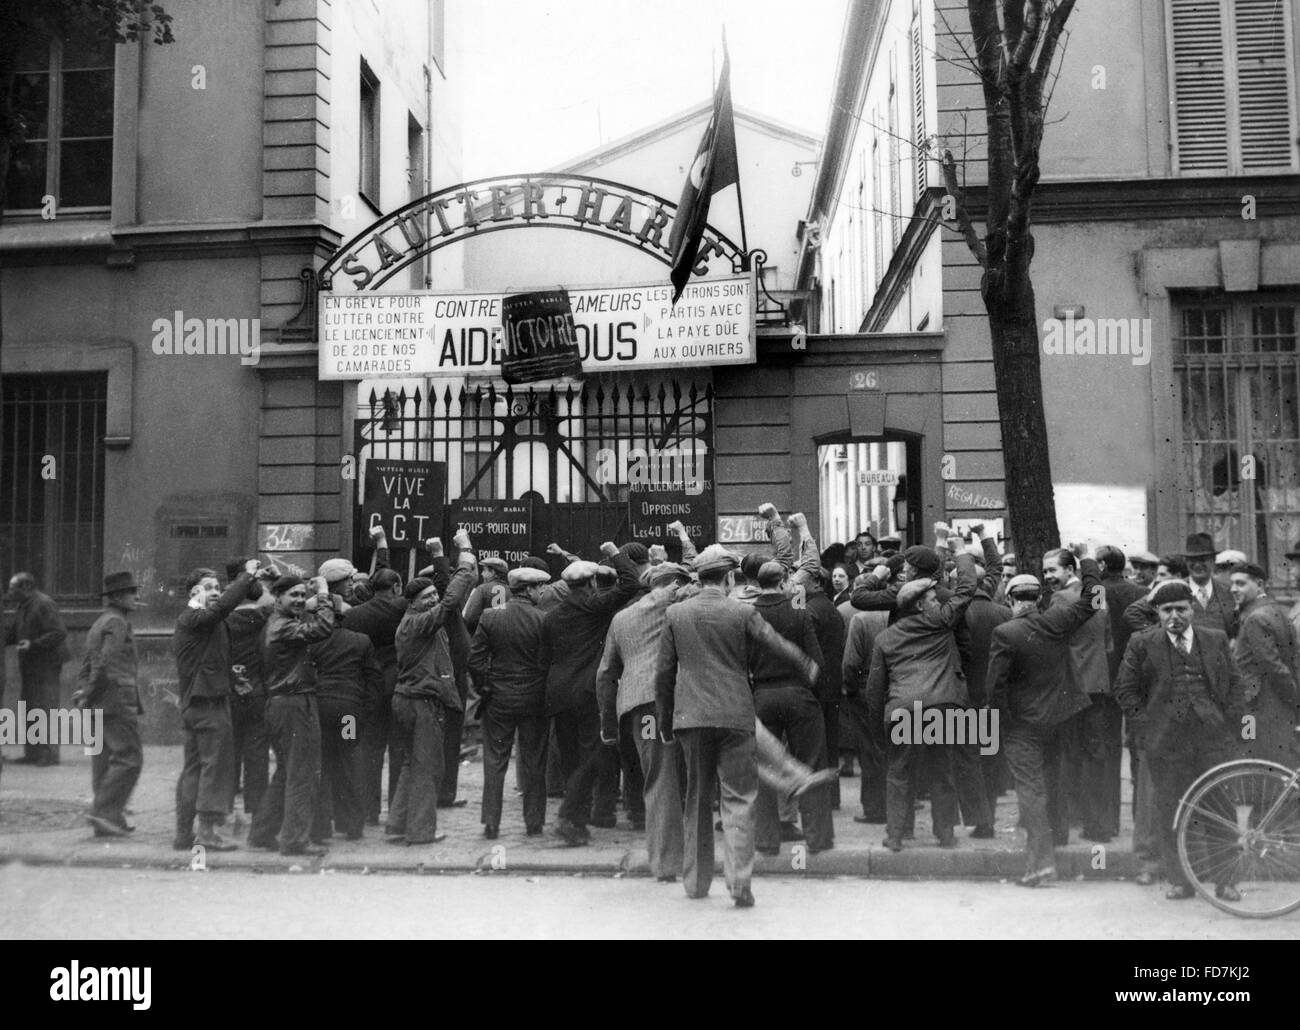 Striking workers give Communist salute in France, 1936 Stock Photo